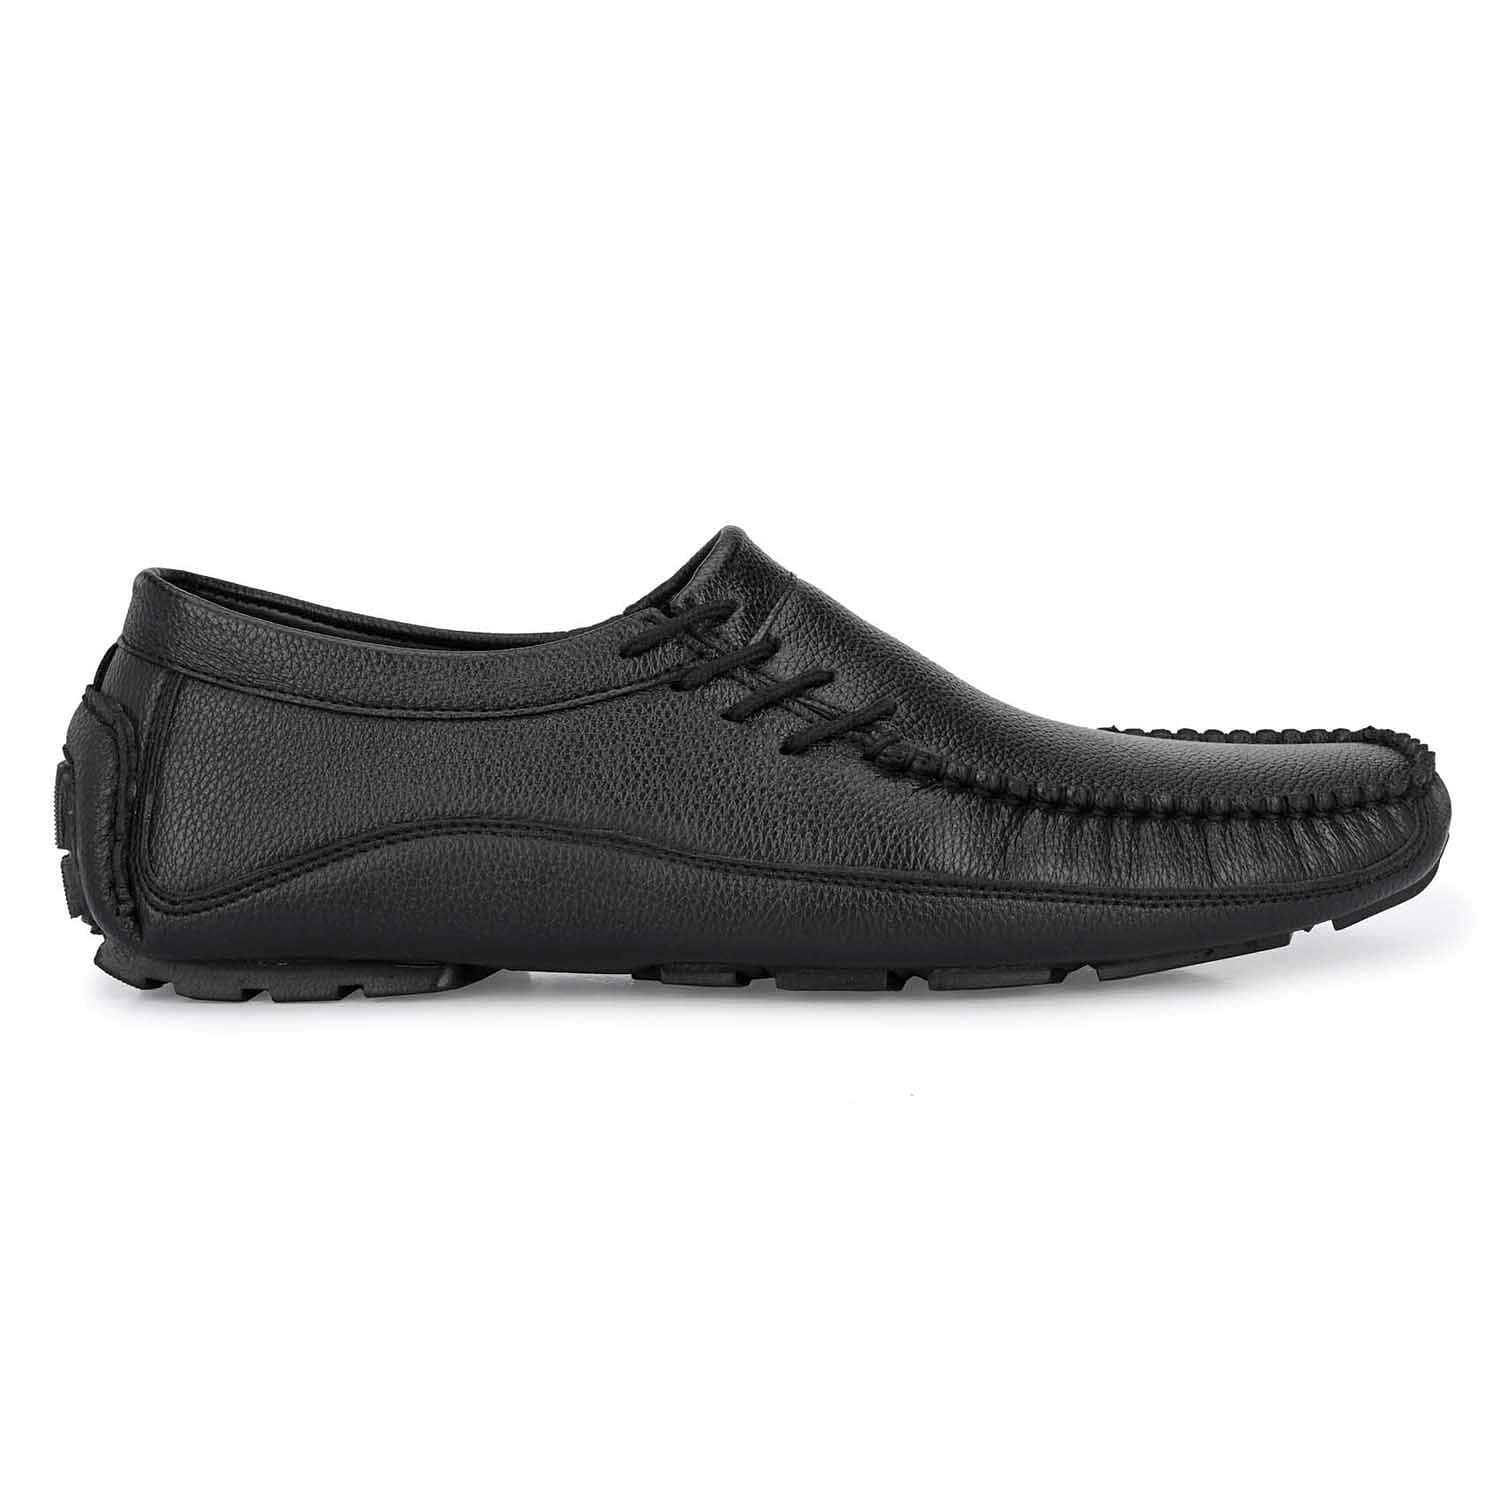 Pair-it Men's Loafers Shoes - Black-LZ-Loafer113